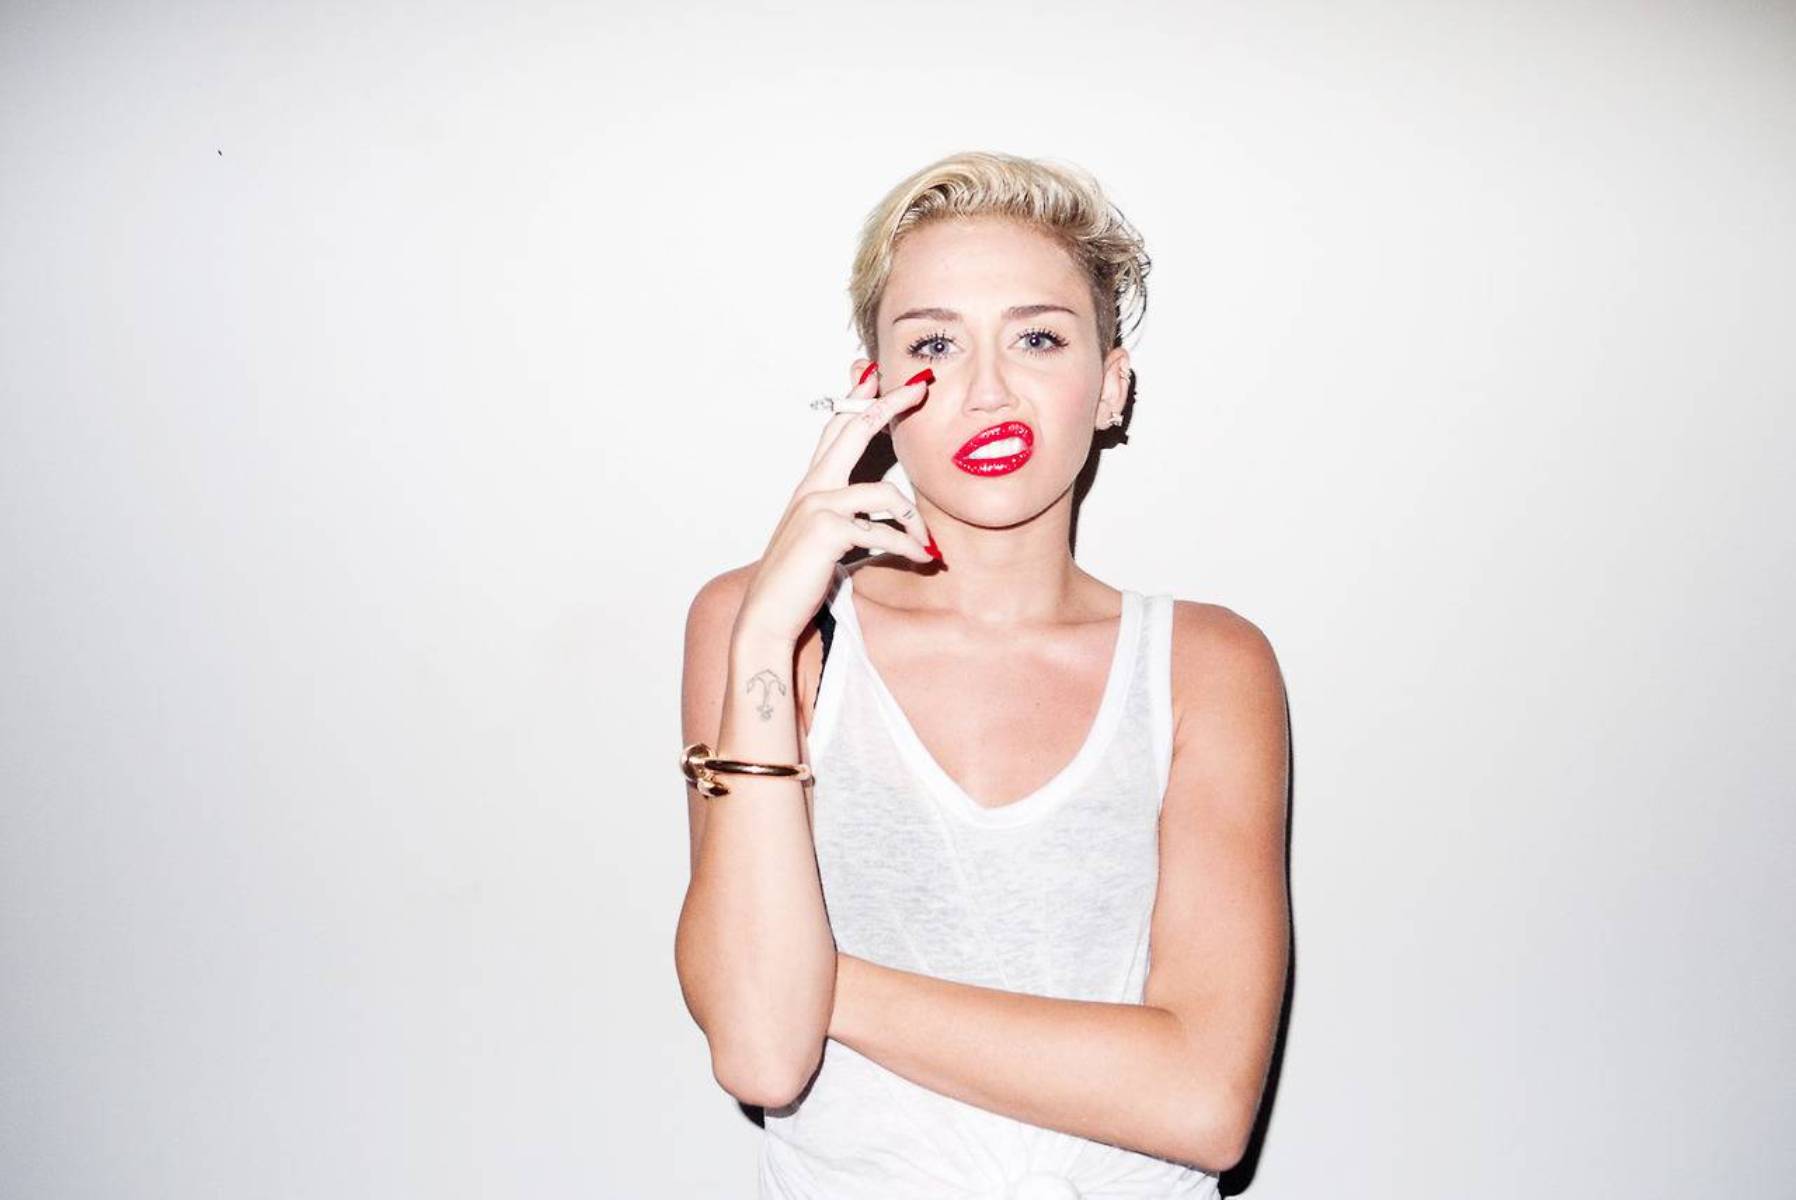 Miley Cyrus Hd Wallpapers - Miley Cyrus Wallpaper 2015 , HD Wallpaper & Backgrounds